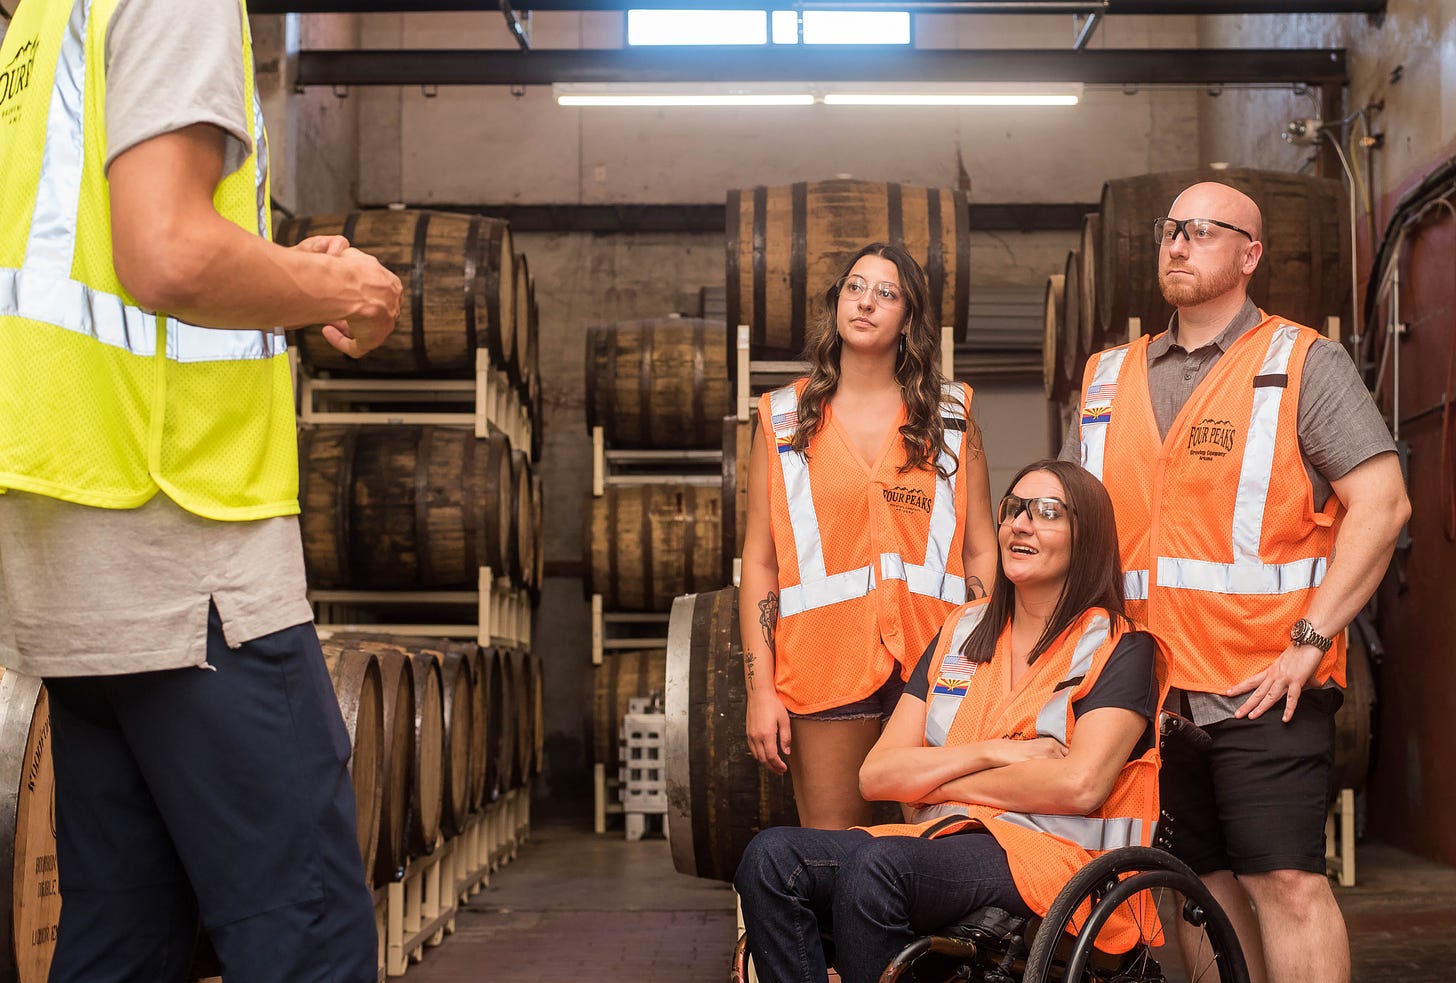 Three people in orange high-vis vests, one woman is in a wheelchair, looking at someone in a yellow vest. In the background are barrels.